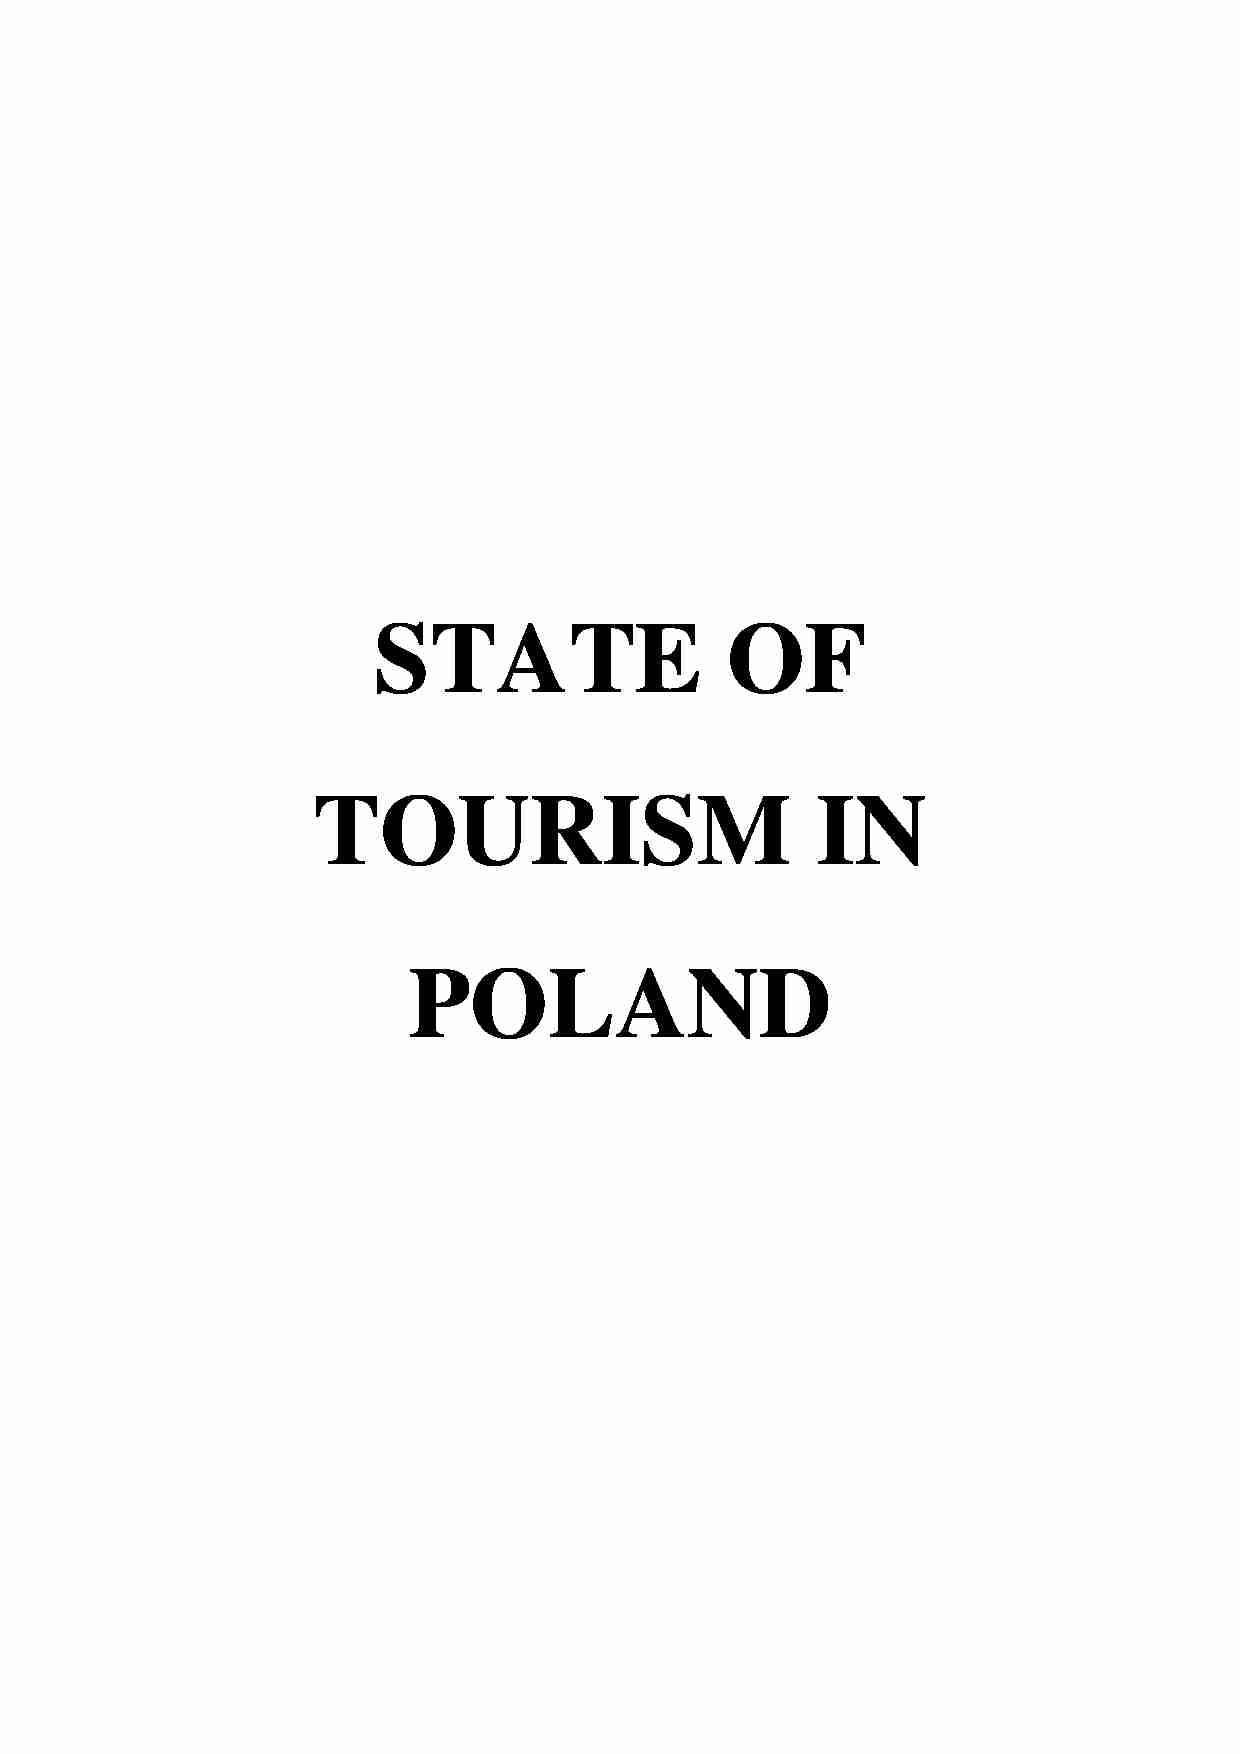 Report: tourism in Poland - strona 1